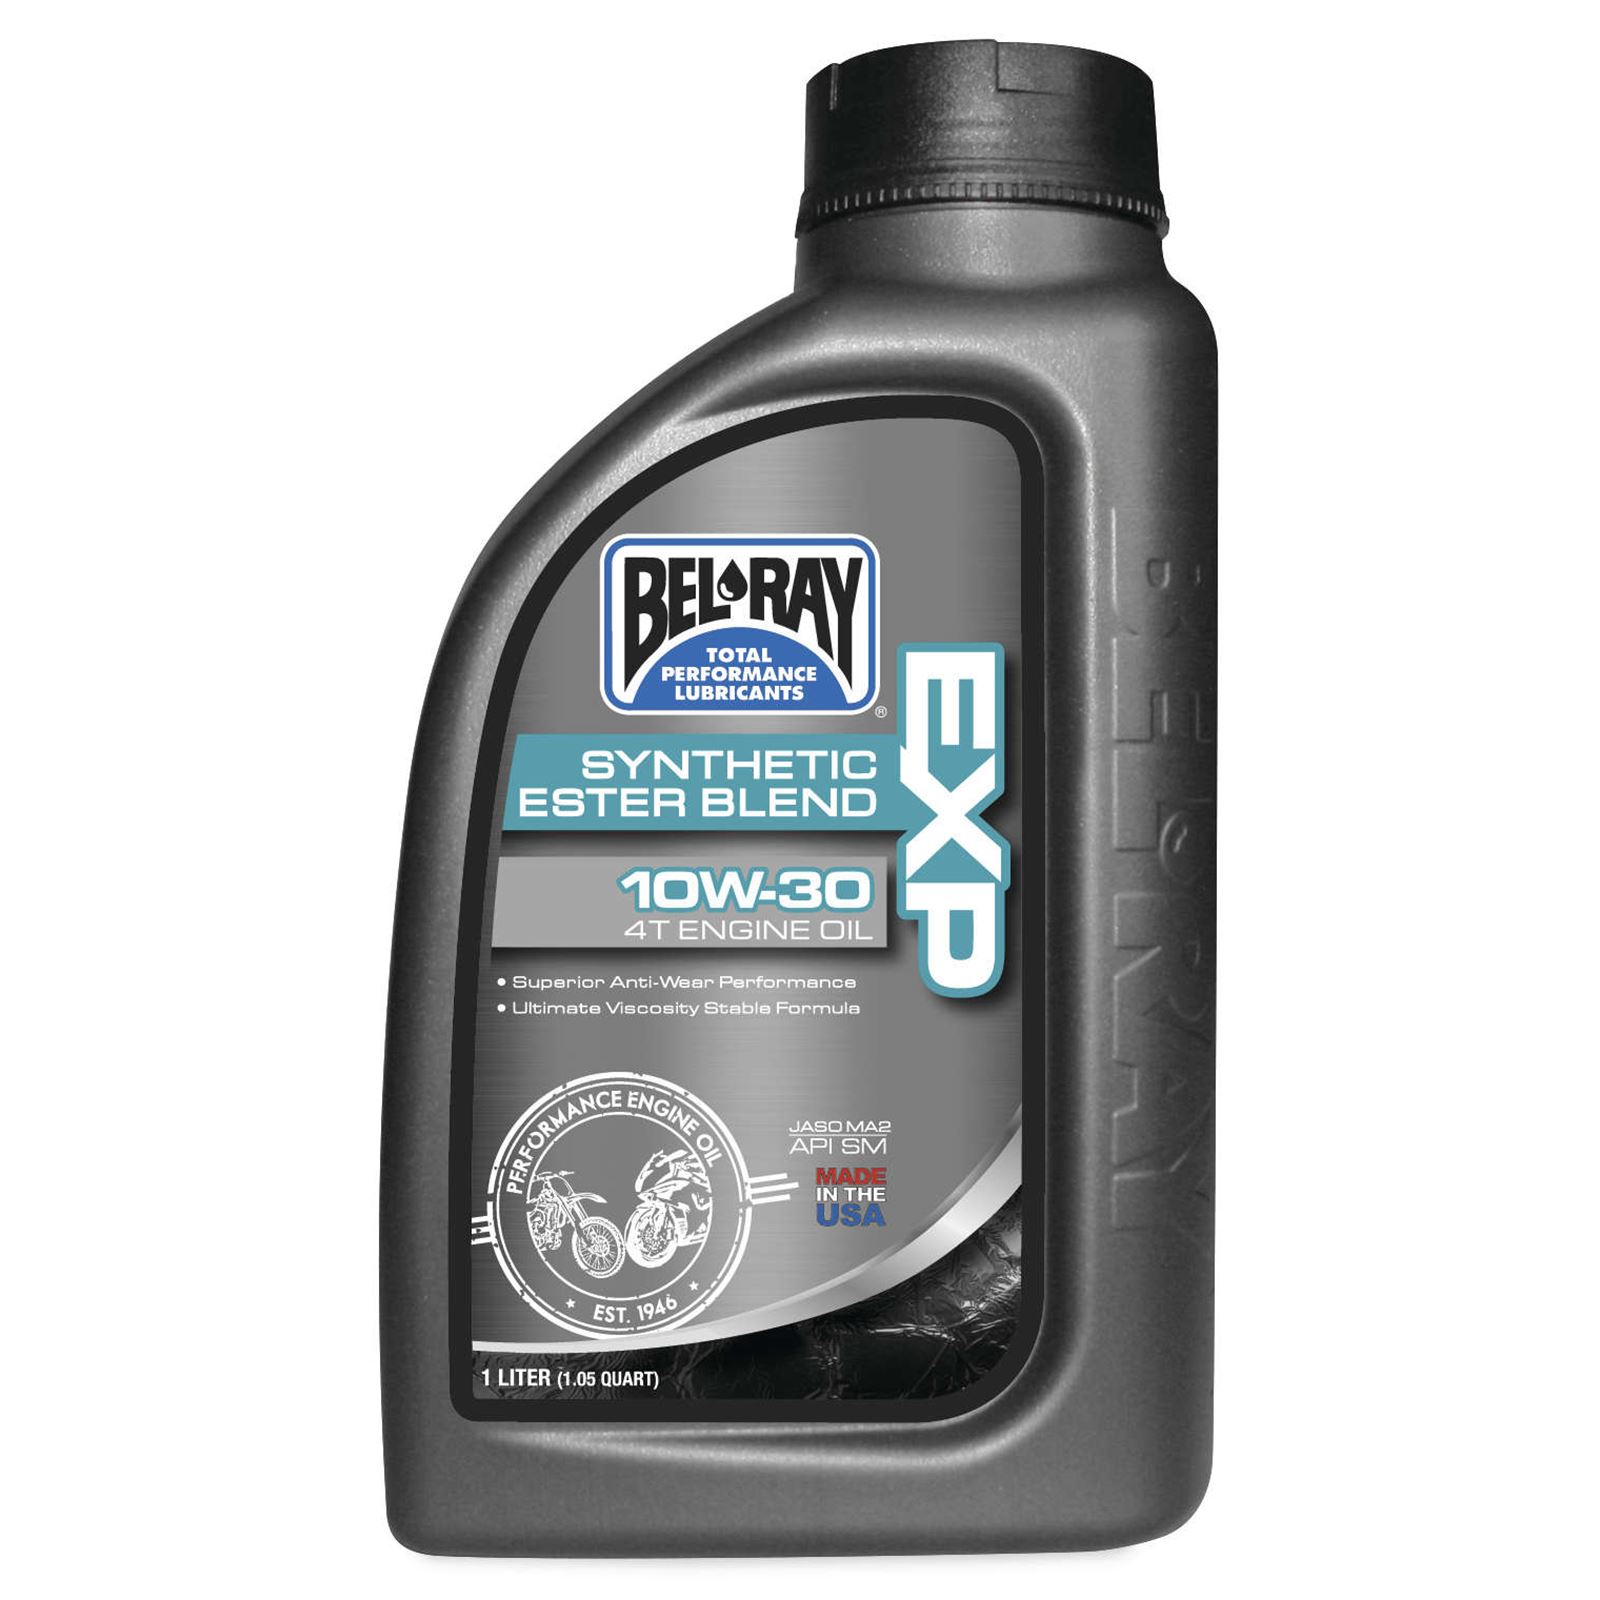 Bel-Ray EXP Semi-Synthetic Ester Blend 4T Engine Oil